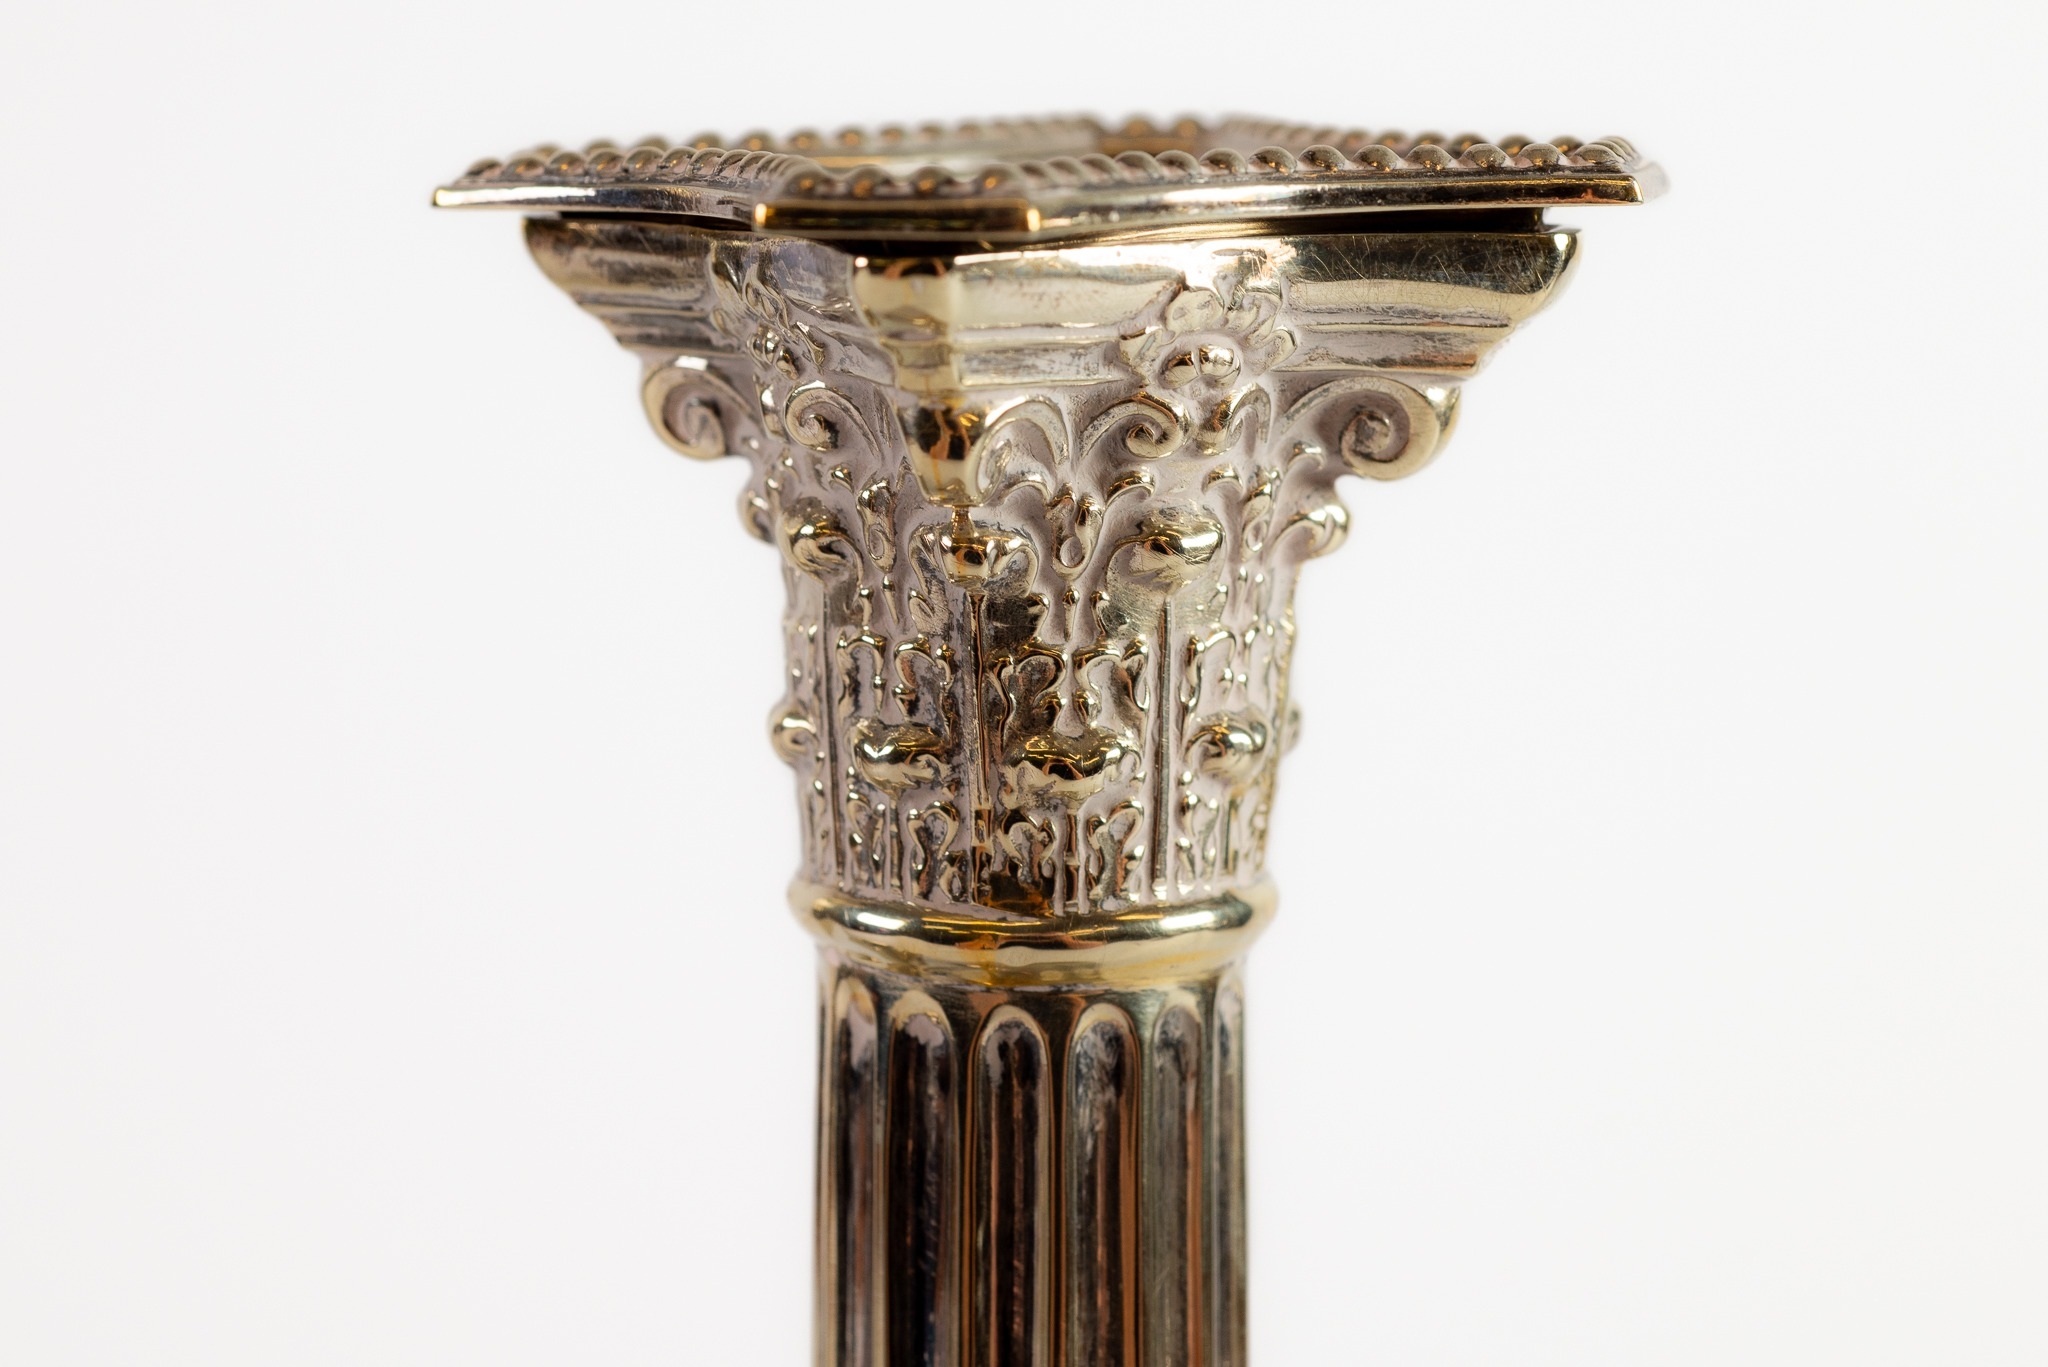 PAIR OF EDWARDIAN ELECTRO-PLATED CORINTHIAN COLUMN CANDLESTICKS WITH REMOVABLE SCONCES (2) - Image 3 of 4